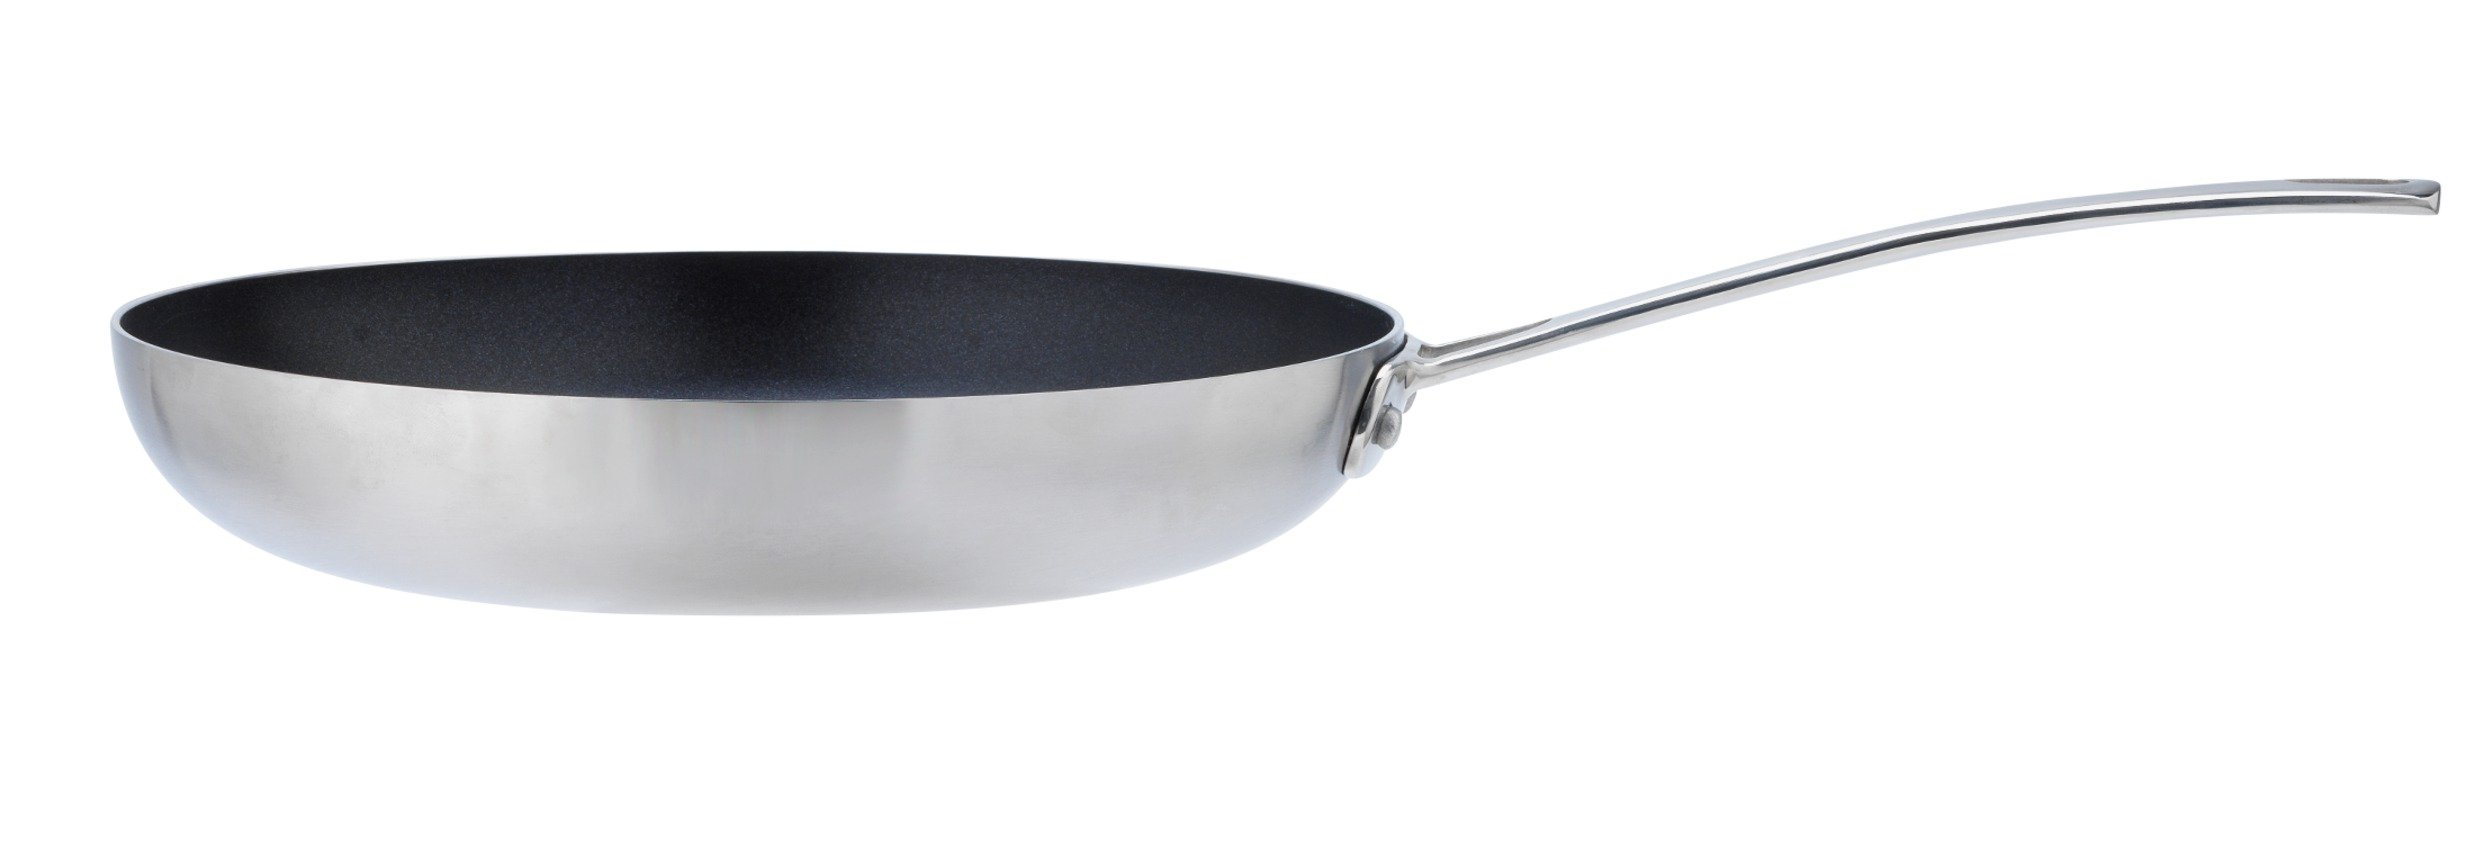 Sainsbury's Home Cooks Collection 28cm Triply Frying Pan